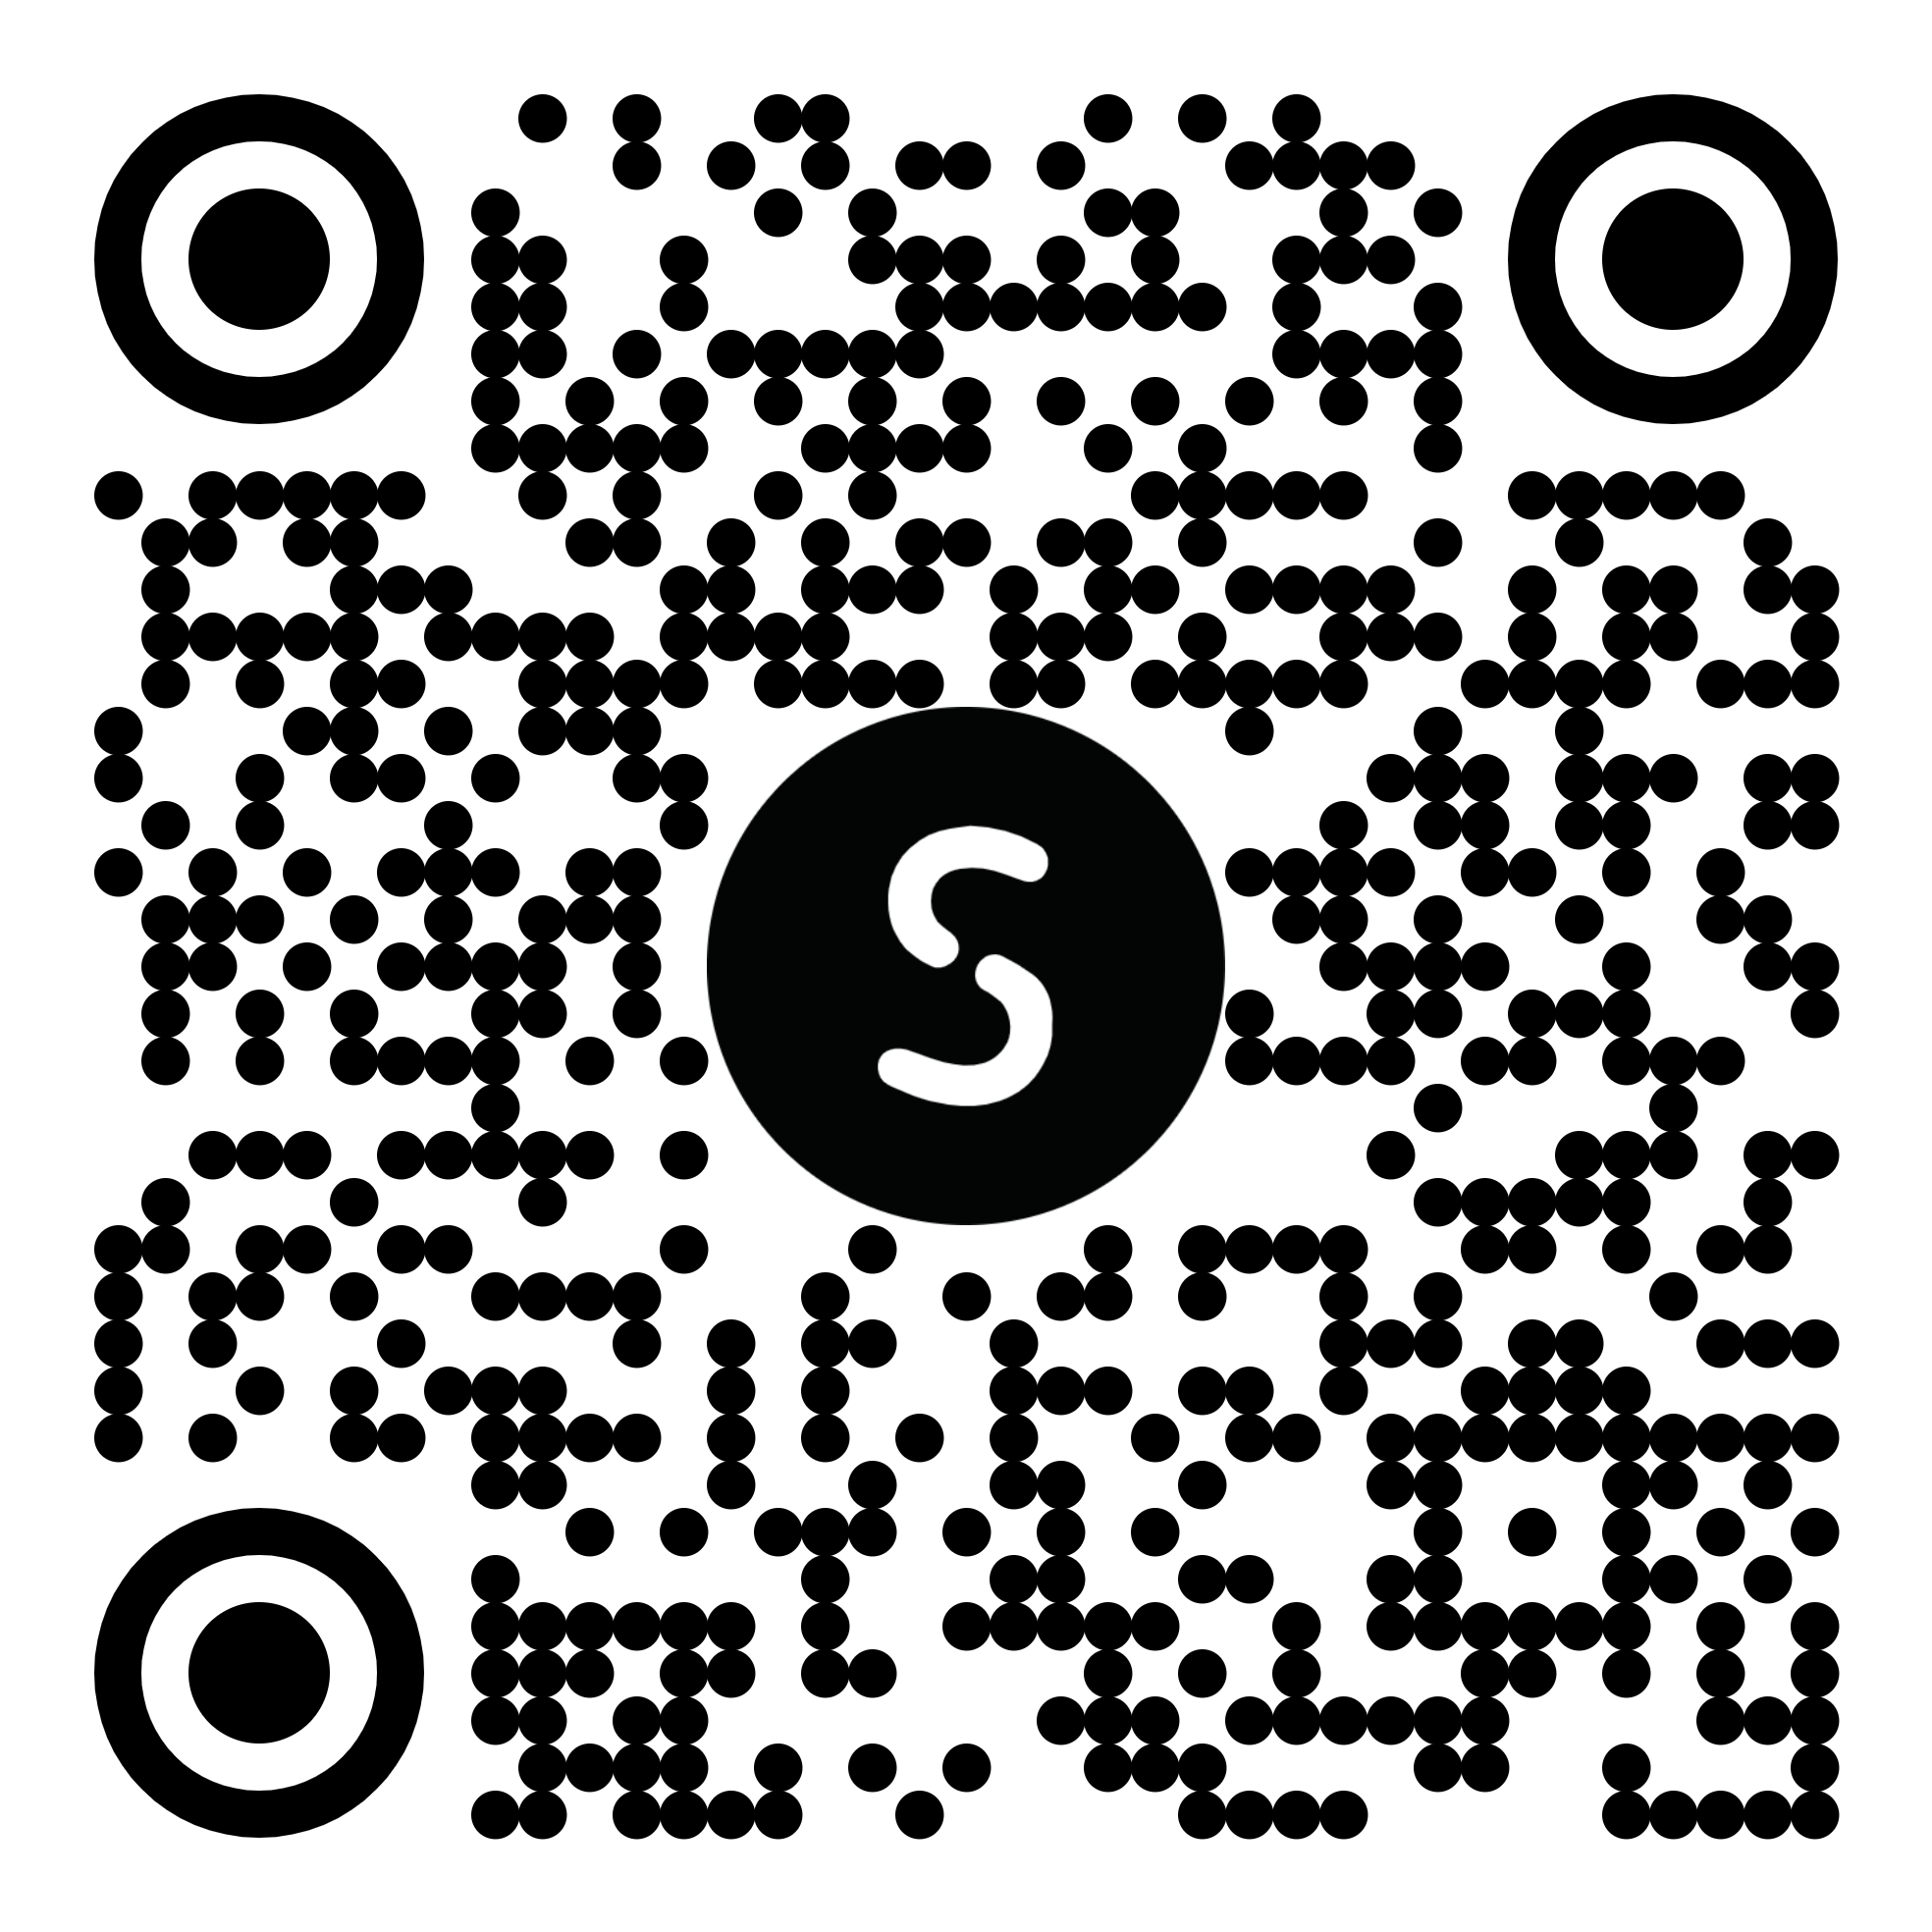 QR code for Self in the Play Store